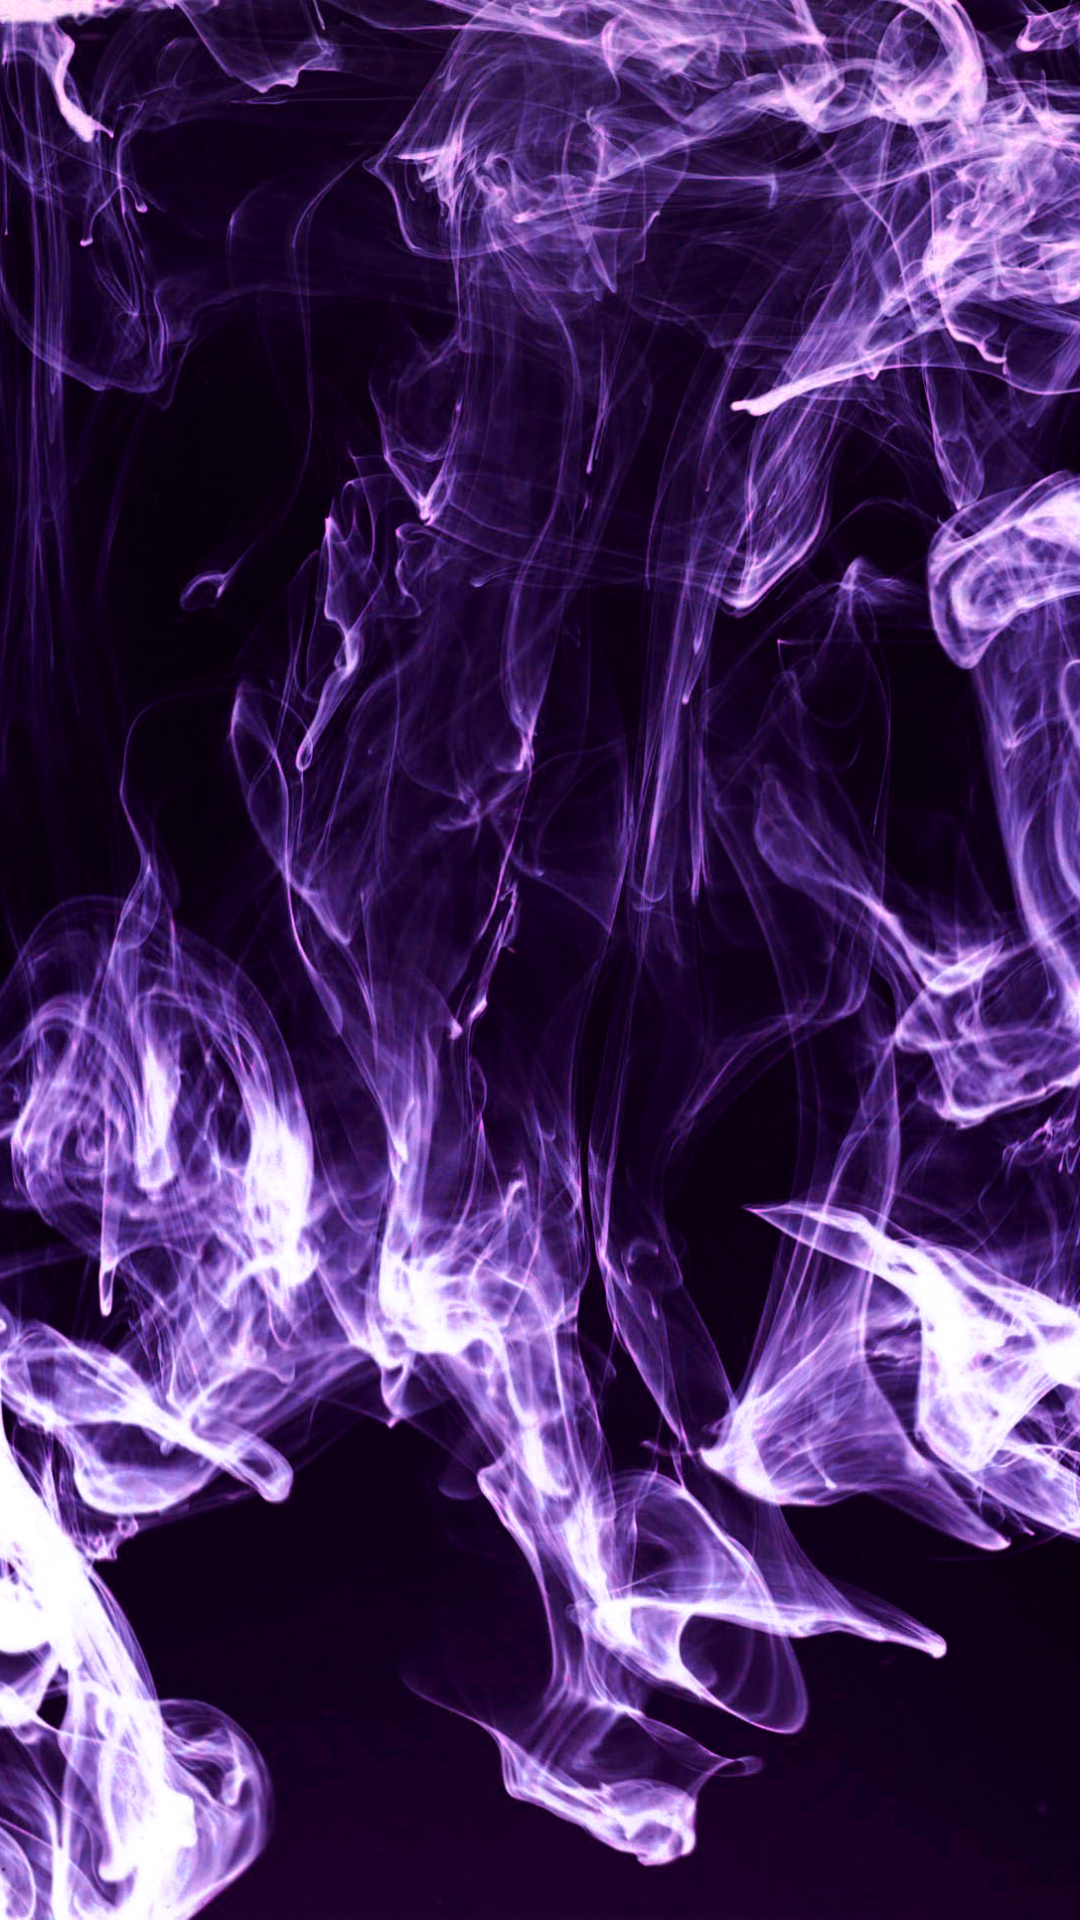 Abstract/Smoke (1080x1920) Wallpaper ID: 631802 - Mobile Abyss